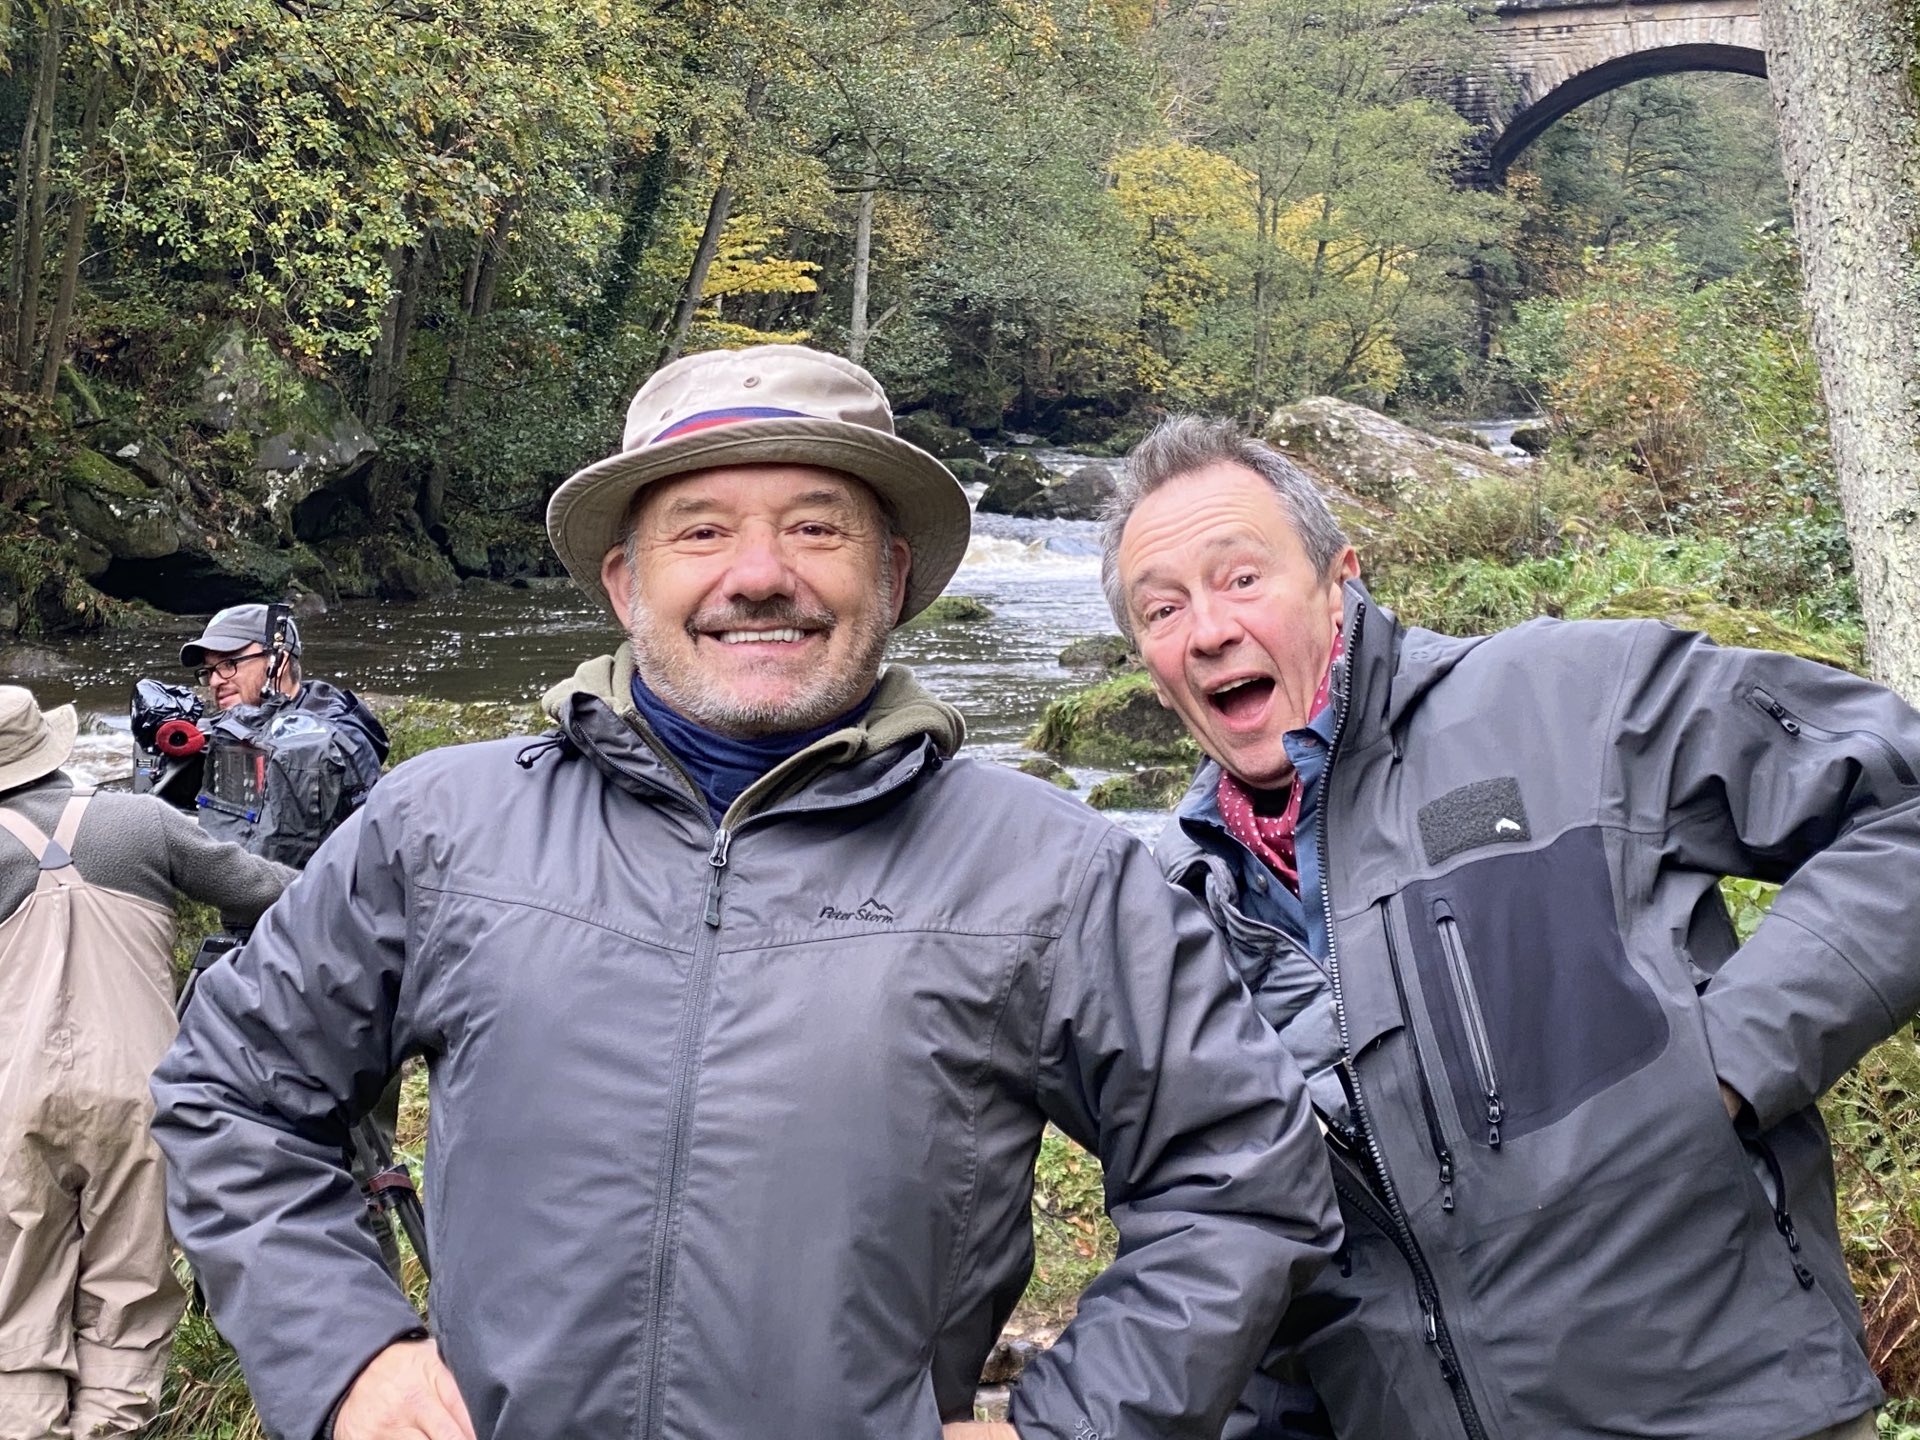 Mortimer and Whitehouse Gone Fishing